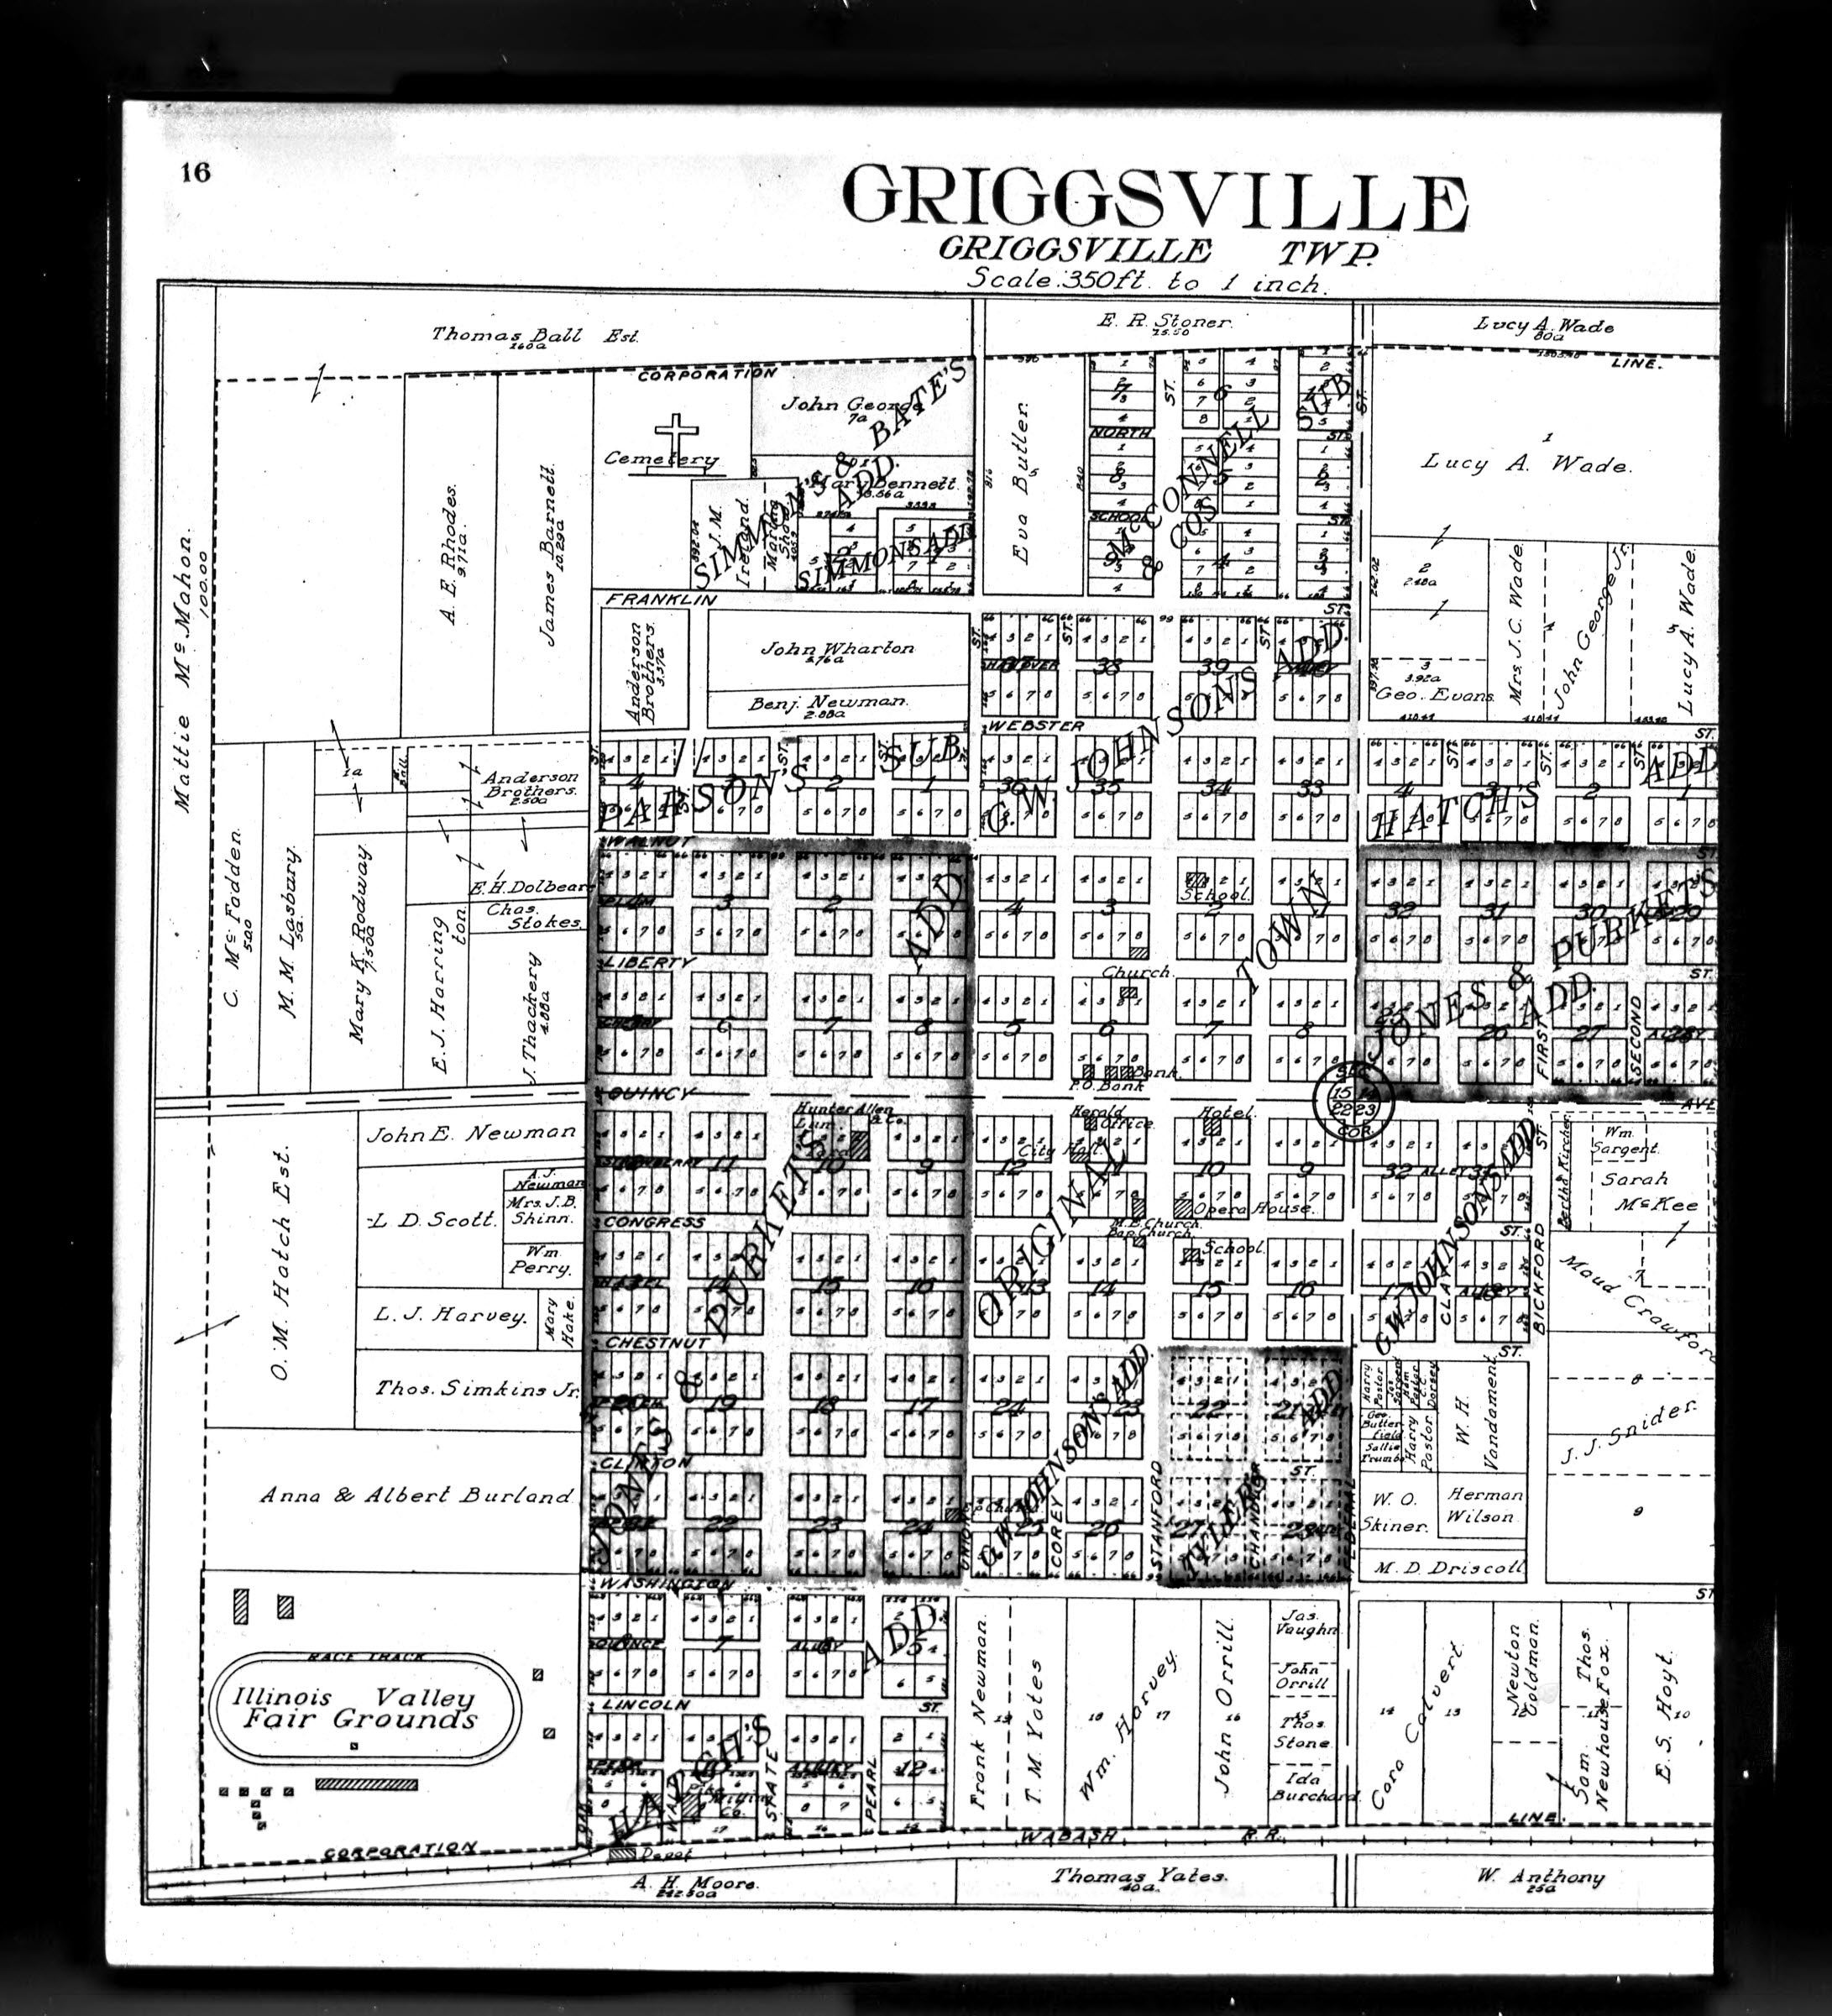 Map of Land ownership in Griggsville, Pike County, Illinois - 1912.